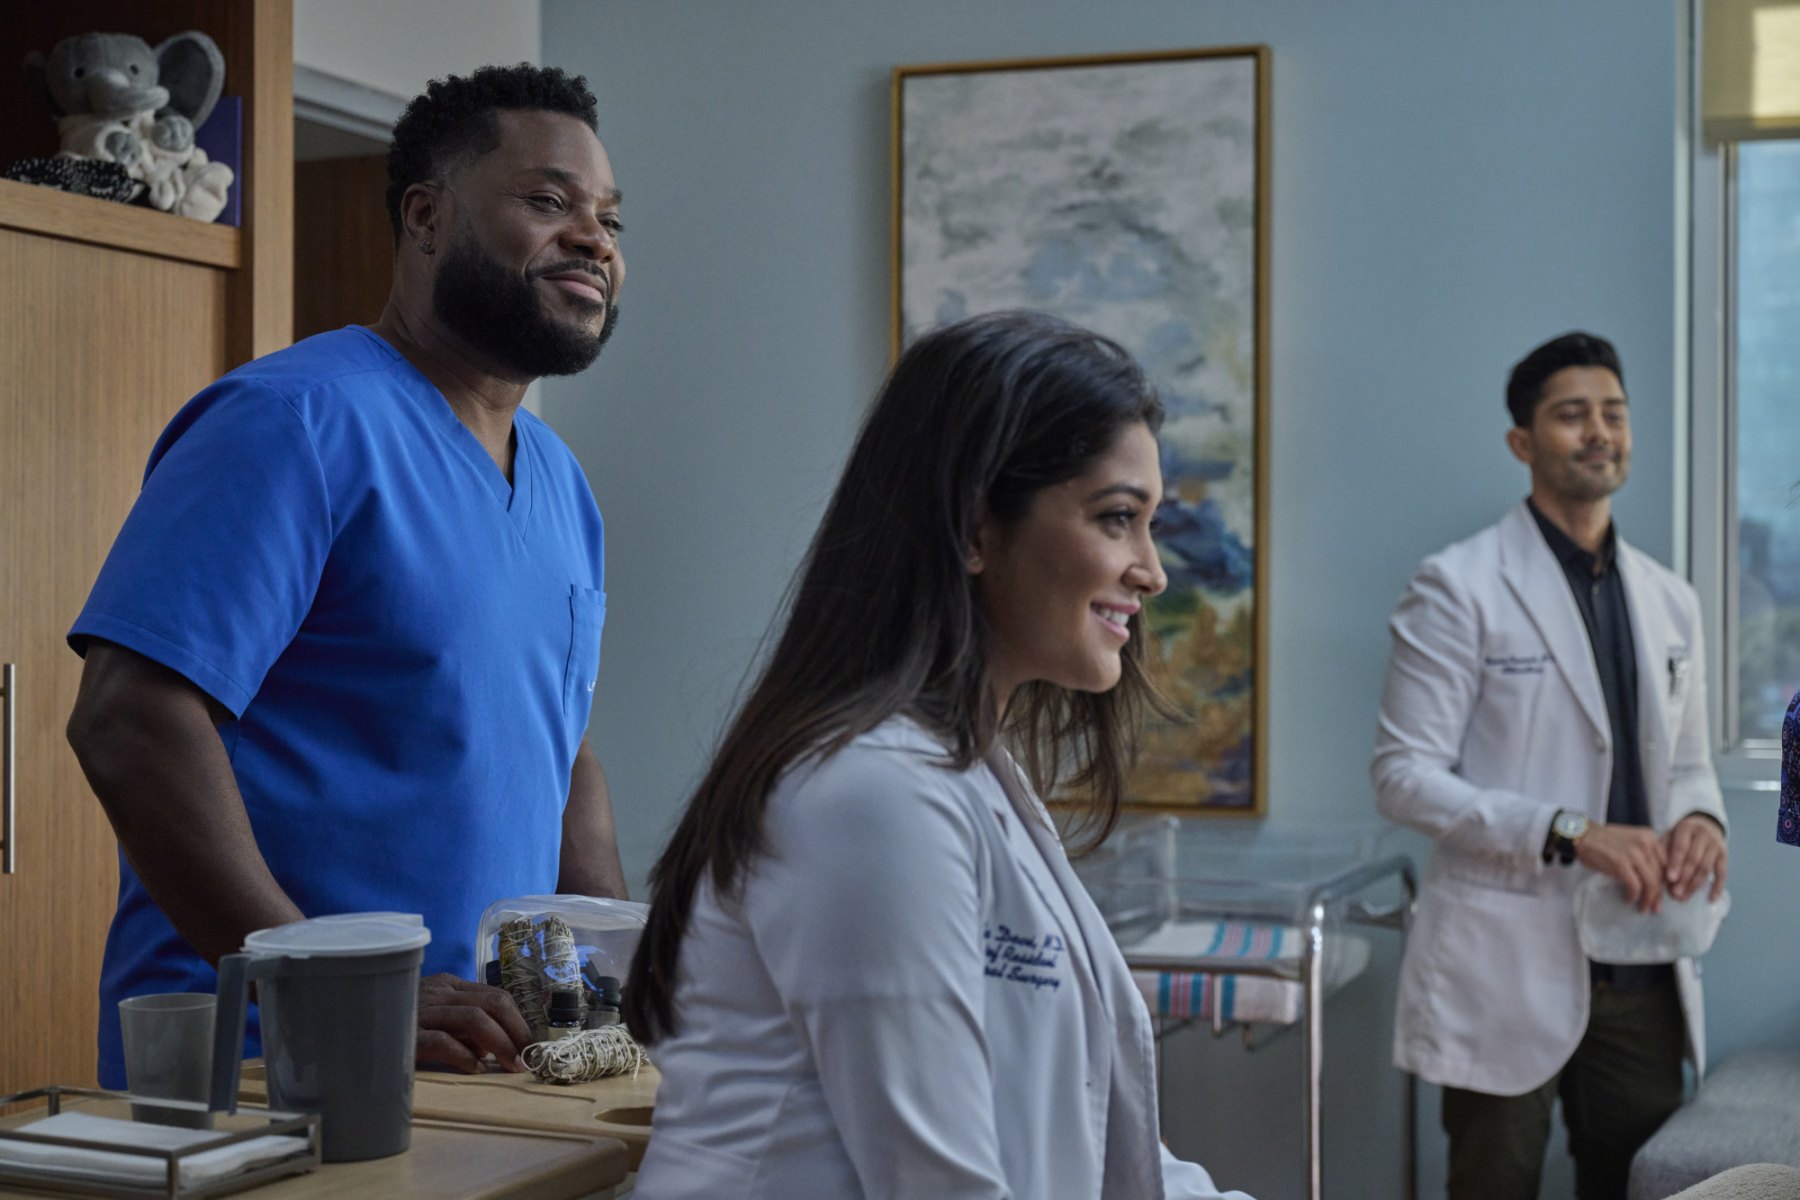 THE RESIDENT: L-R: Malcolm-Jamal Warner, Anuja Joshi, and Manish Dayal in the “One Bullet” episode of THE RESIDENT, airing Tuesday, October 4 (8:00-9:02 PM ET/PT) on FOX. ©2022 Fox Media LLC Cr: Tom Griscom/FOX